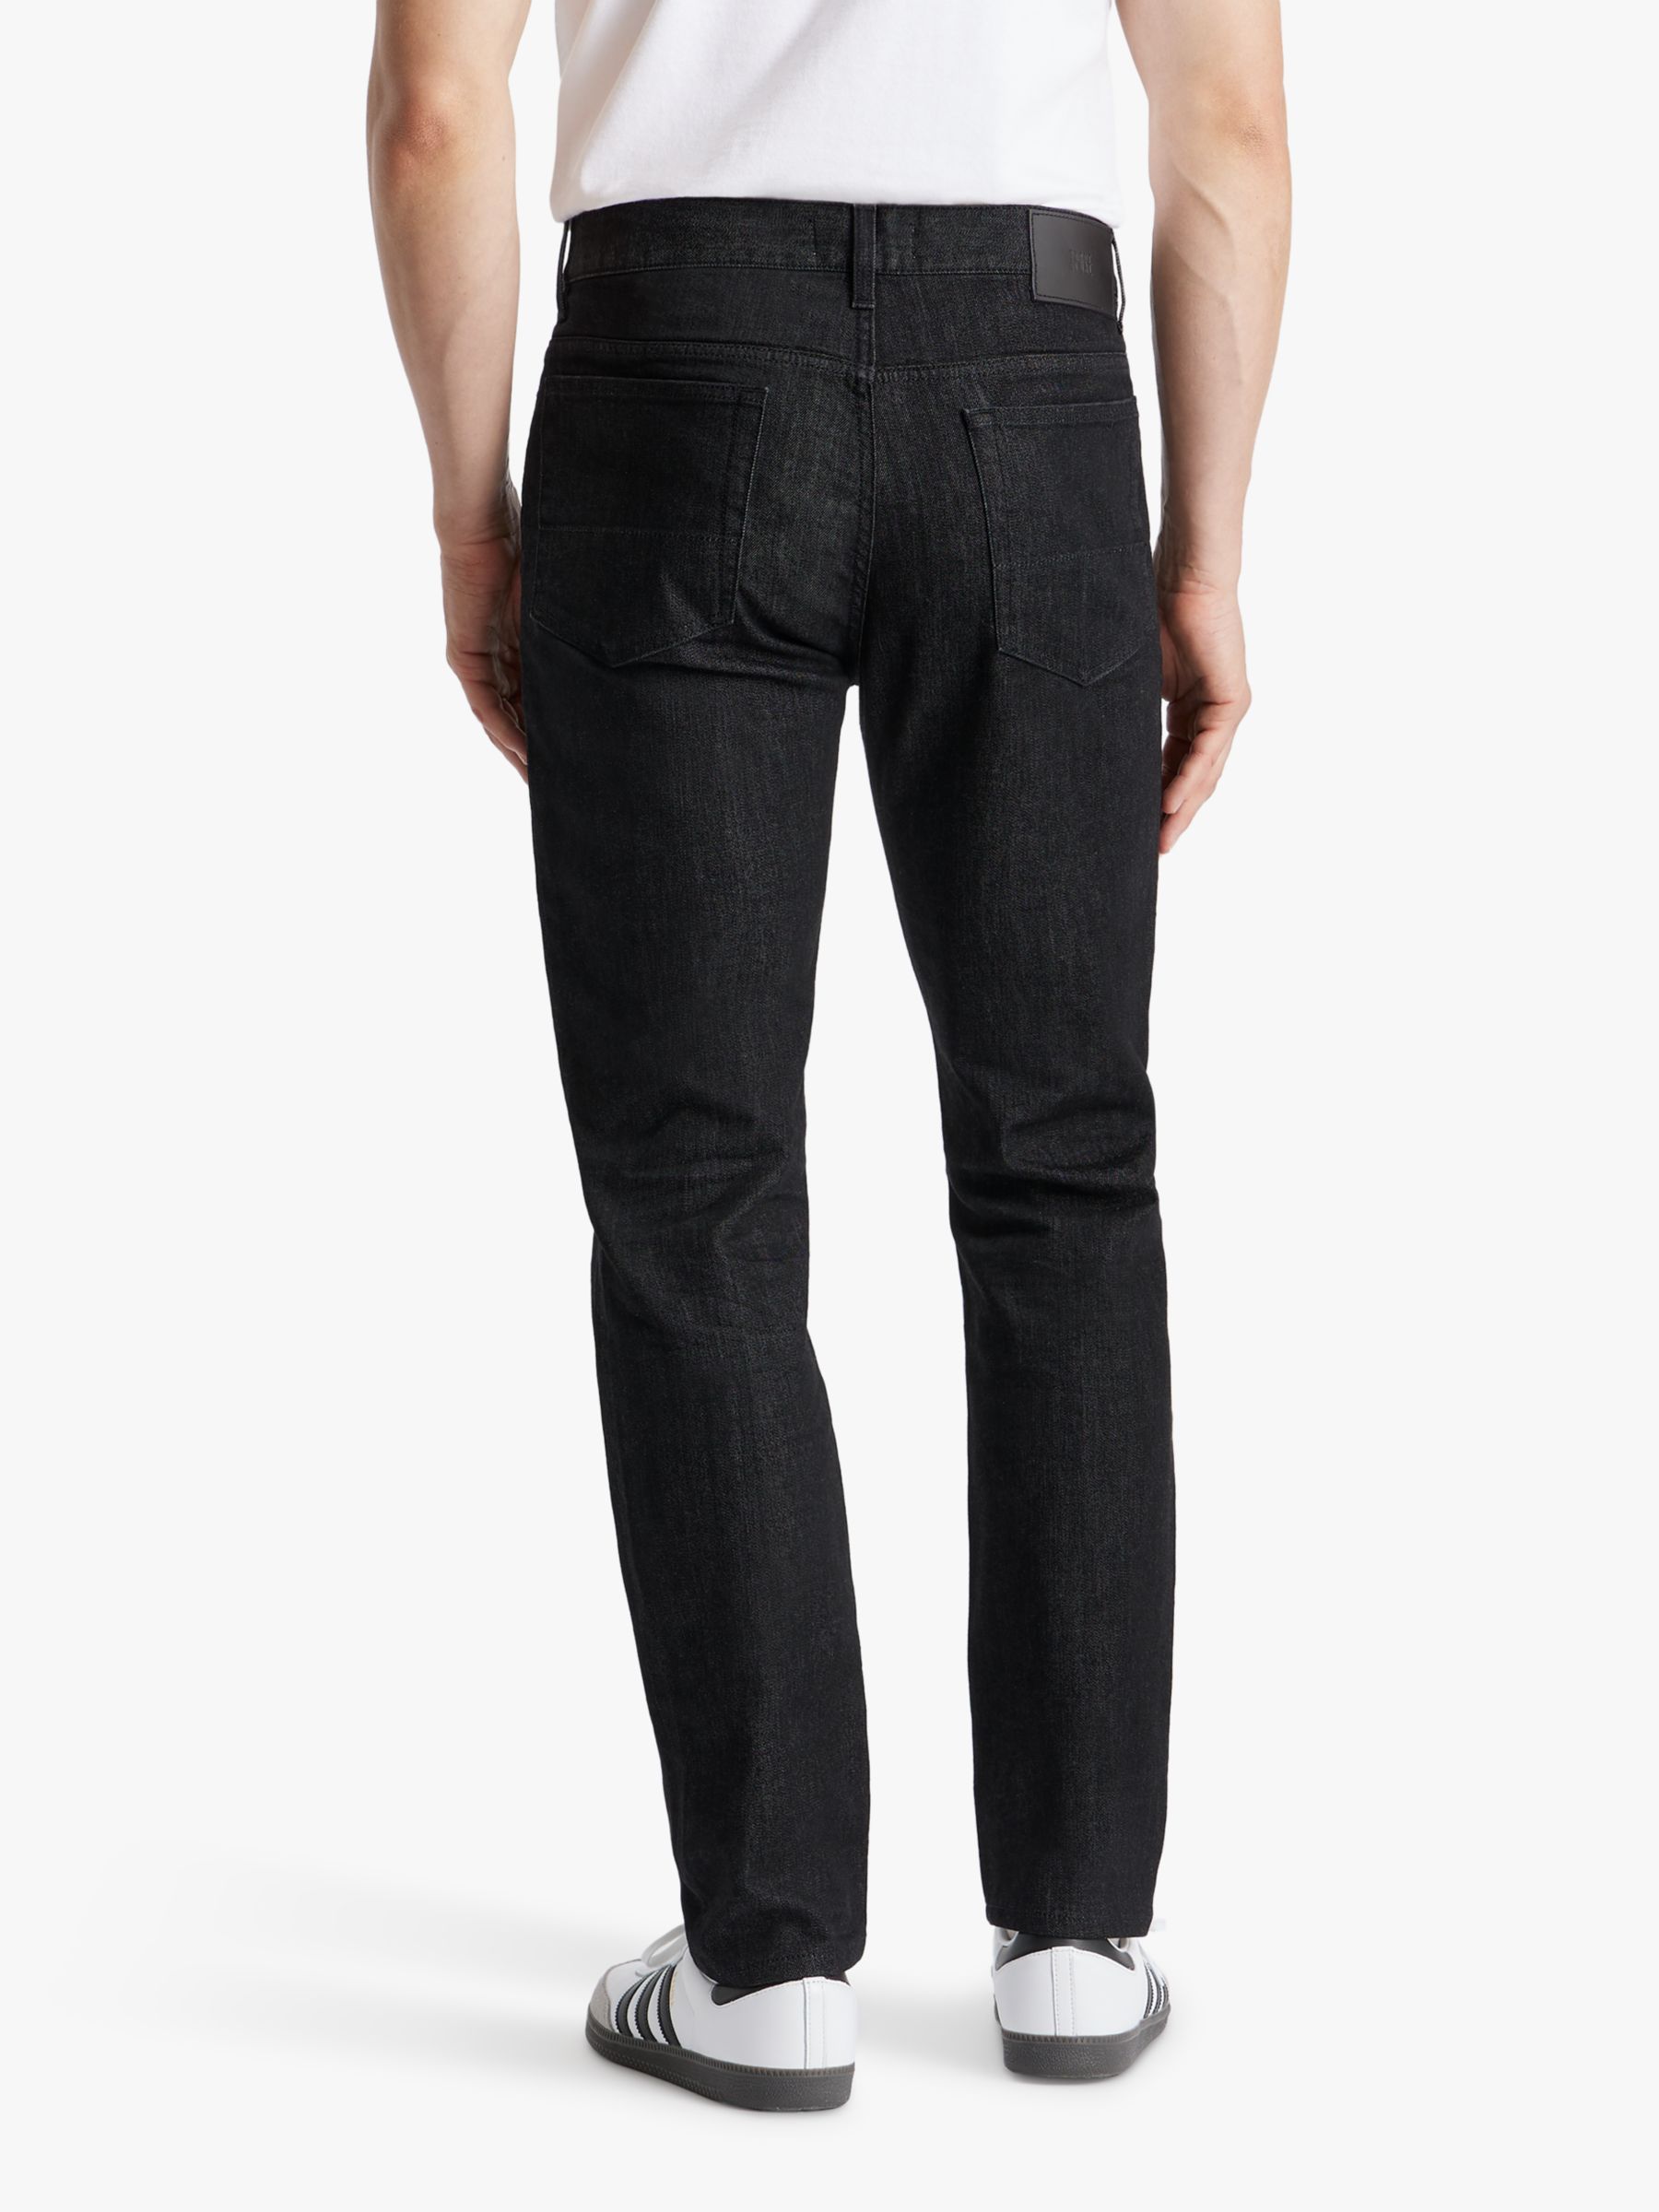 Levi's 501 Original Straight Jeans, One Wash at John Lewis & Partners